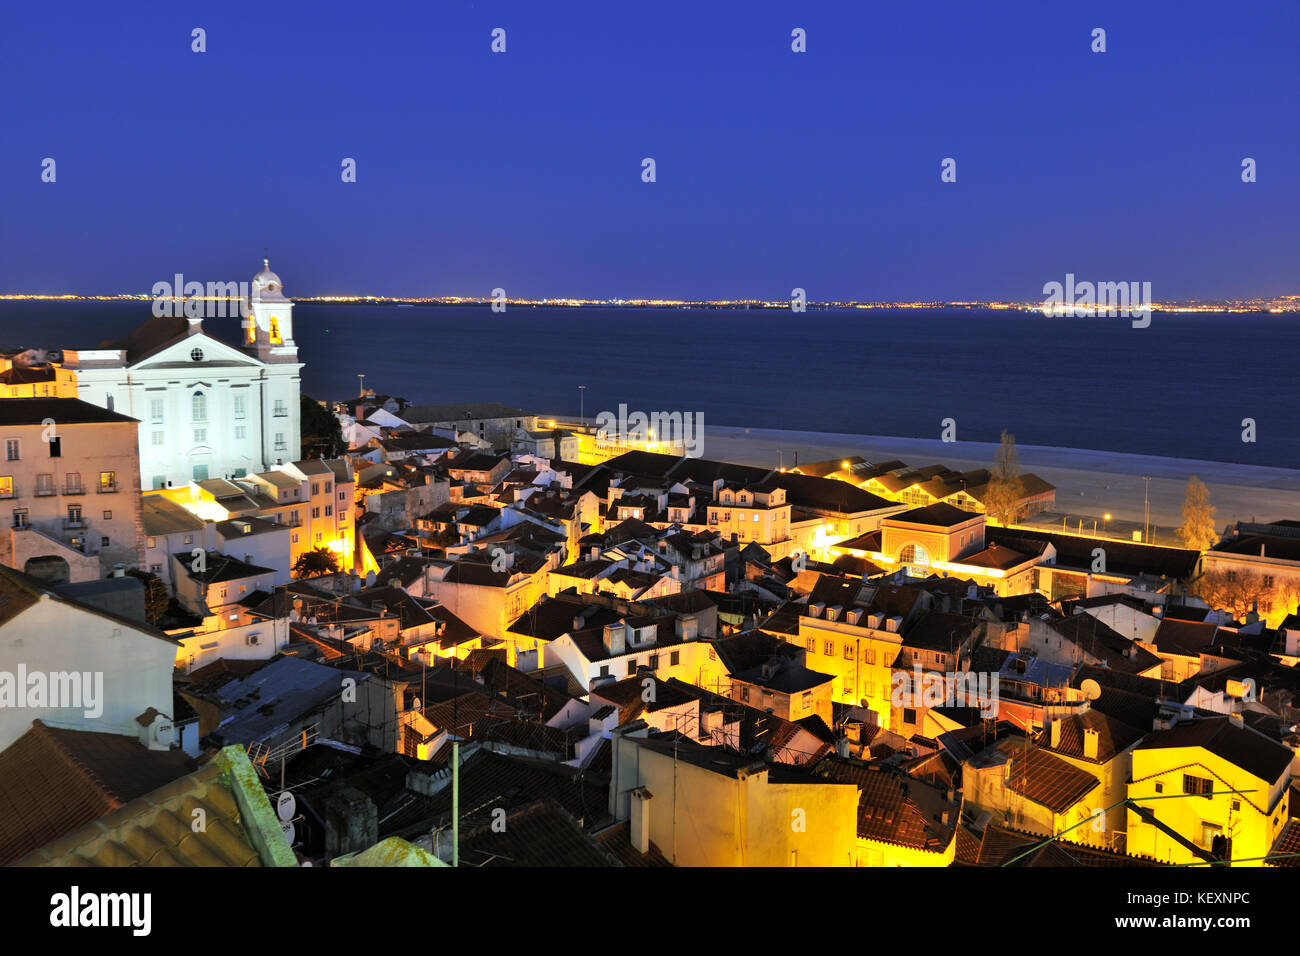 Alfama district and the Tagus river in the evening. Portas do Sol belvedere. Lisbon, Portugal Stock Photo